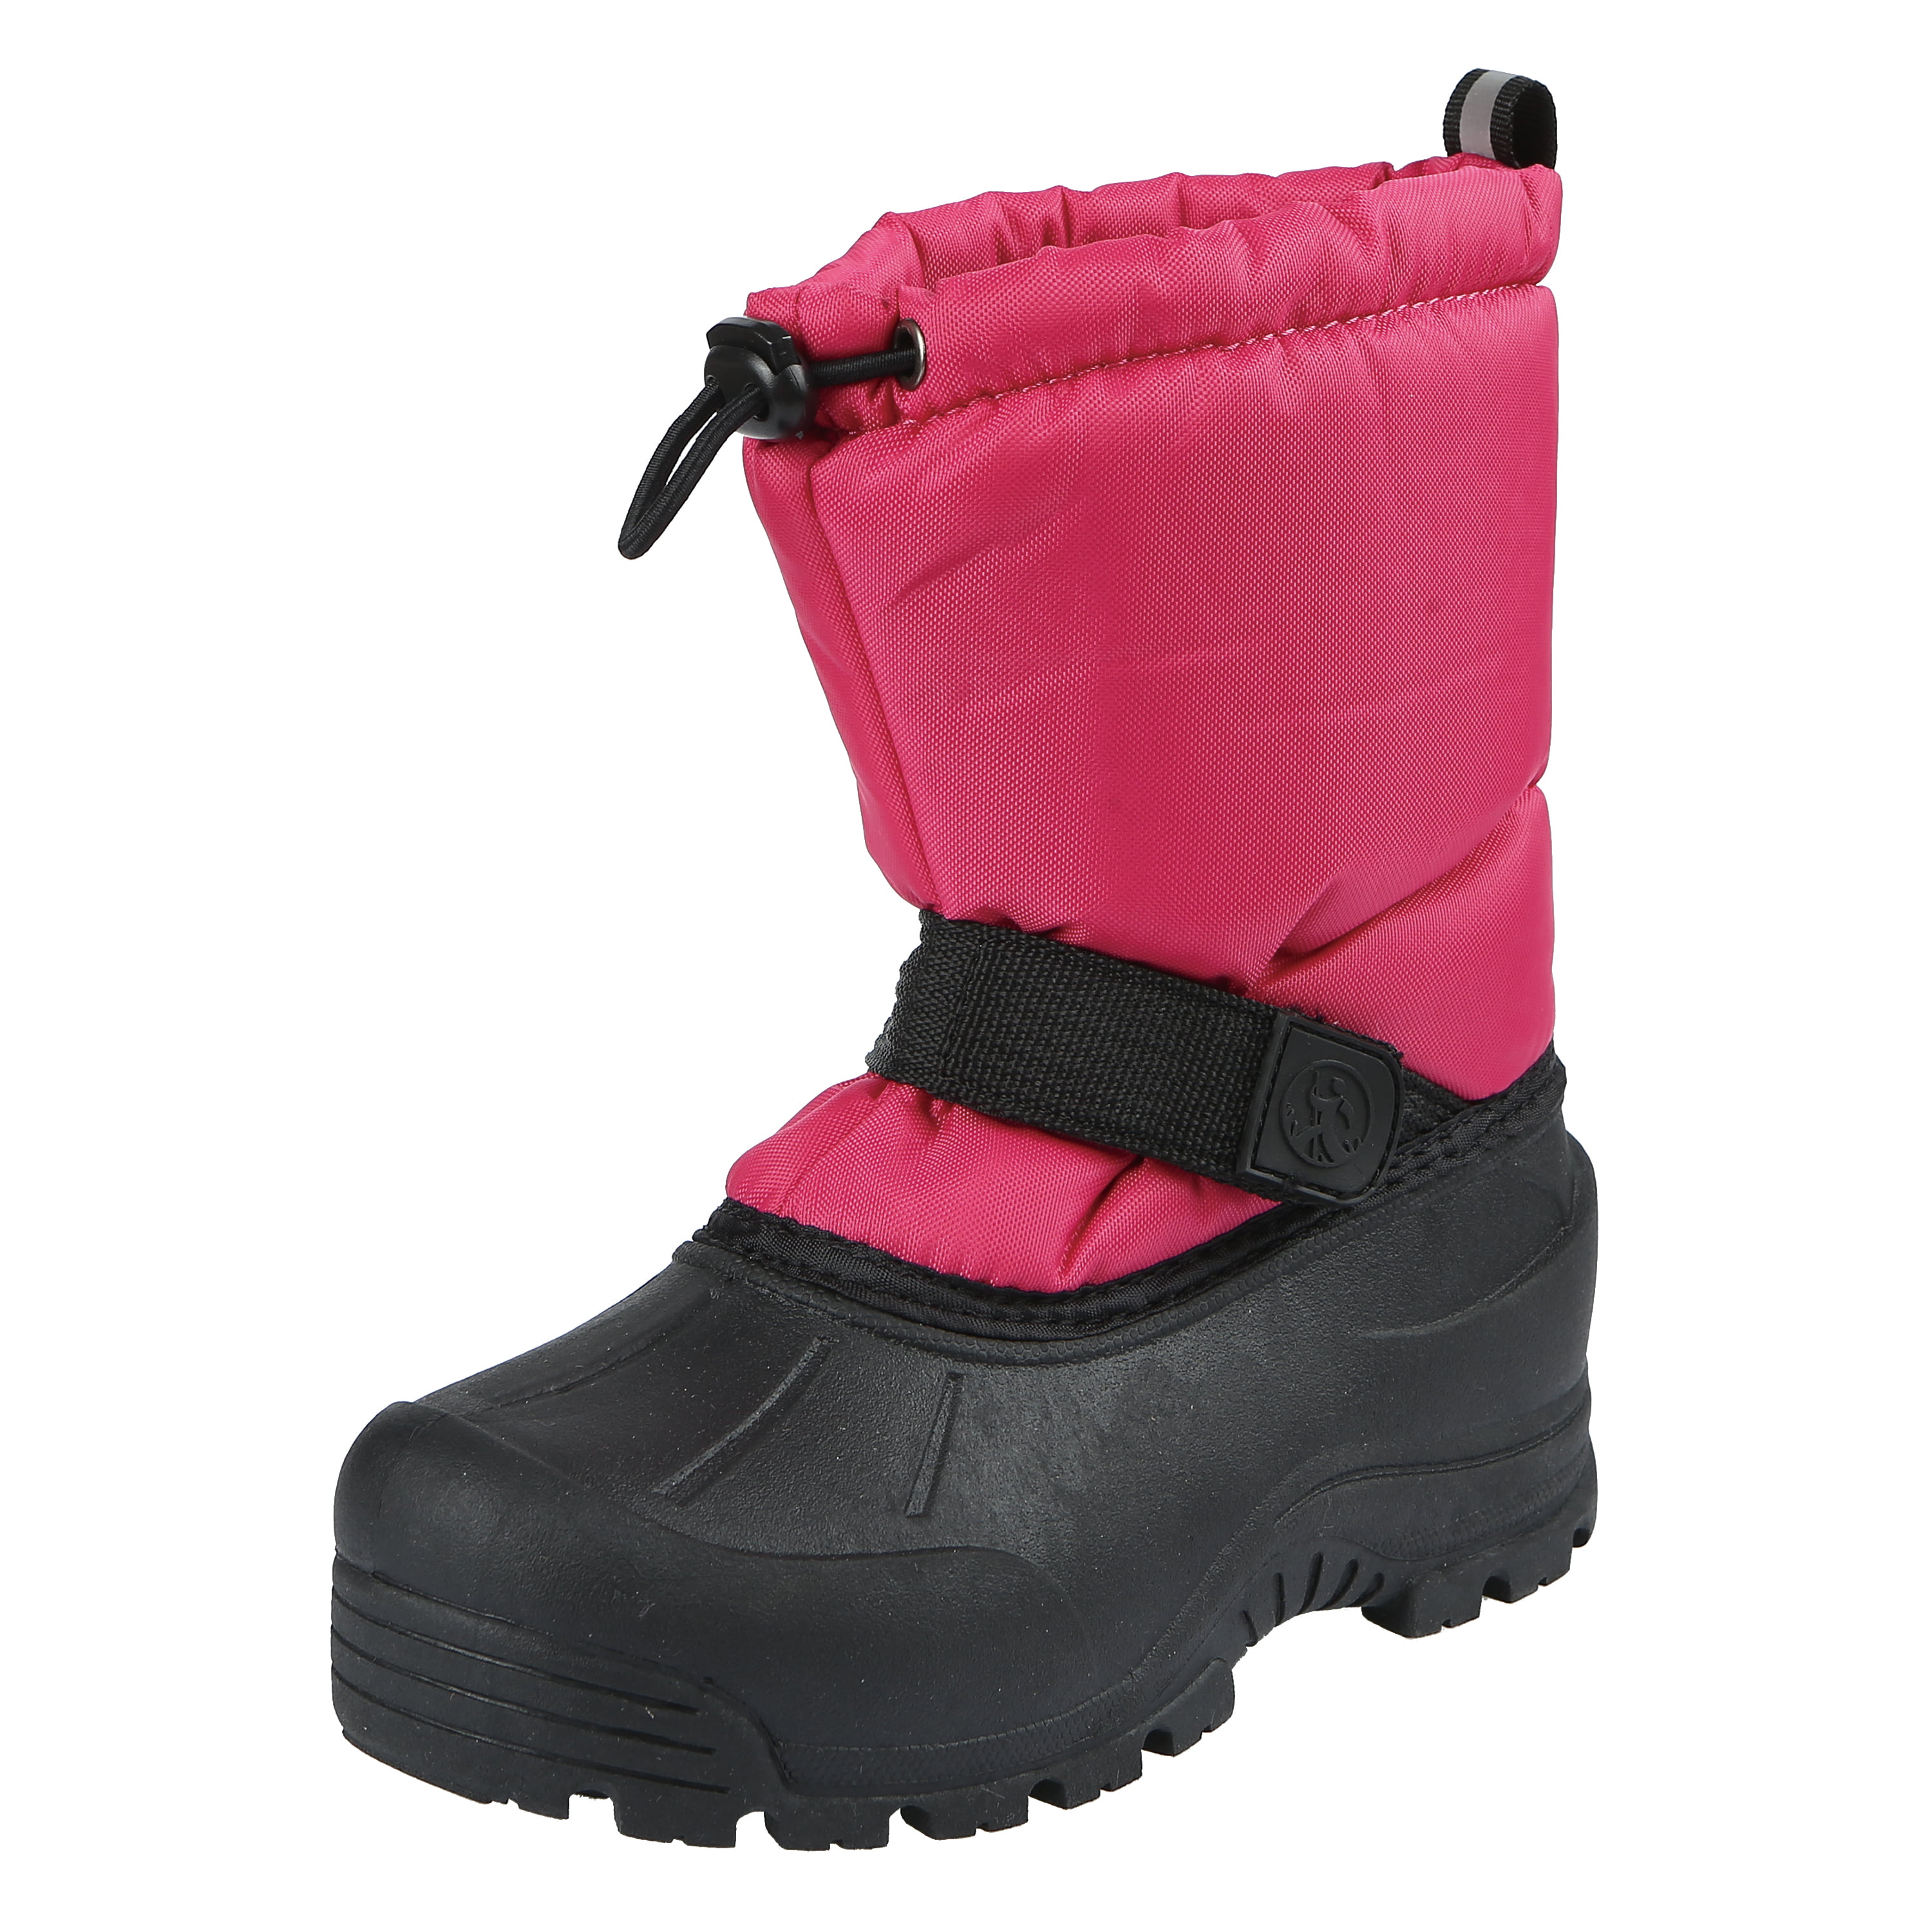 Northside - Northside Kids Frosty Insulated Winter Snow Boot Toddler